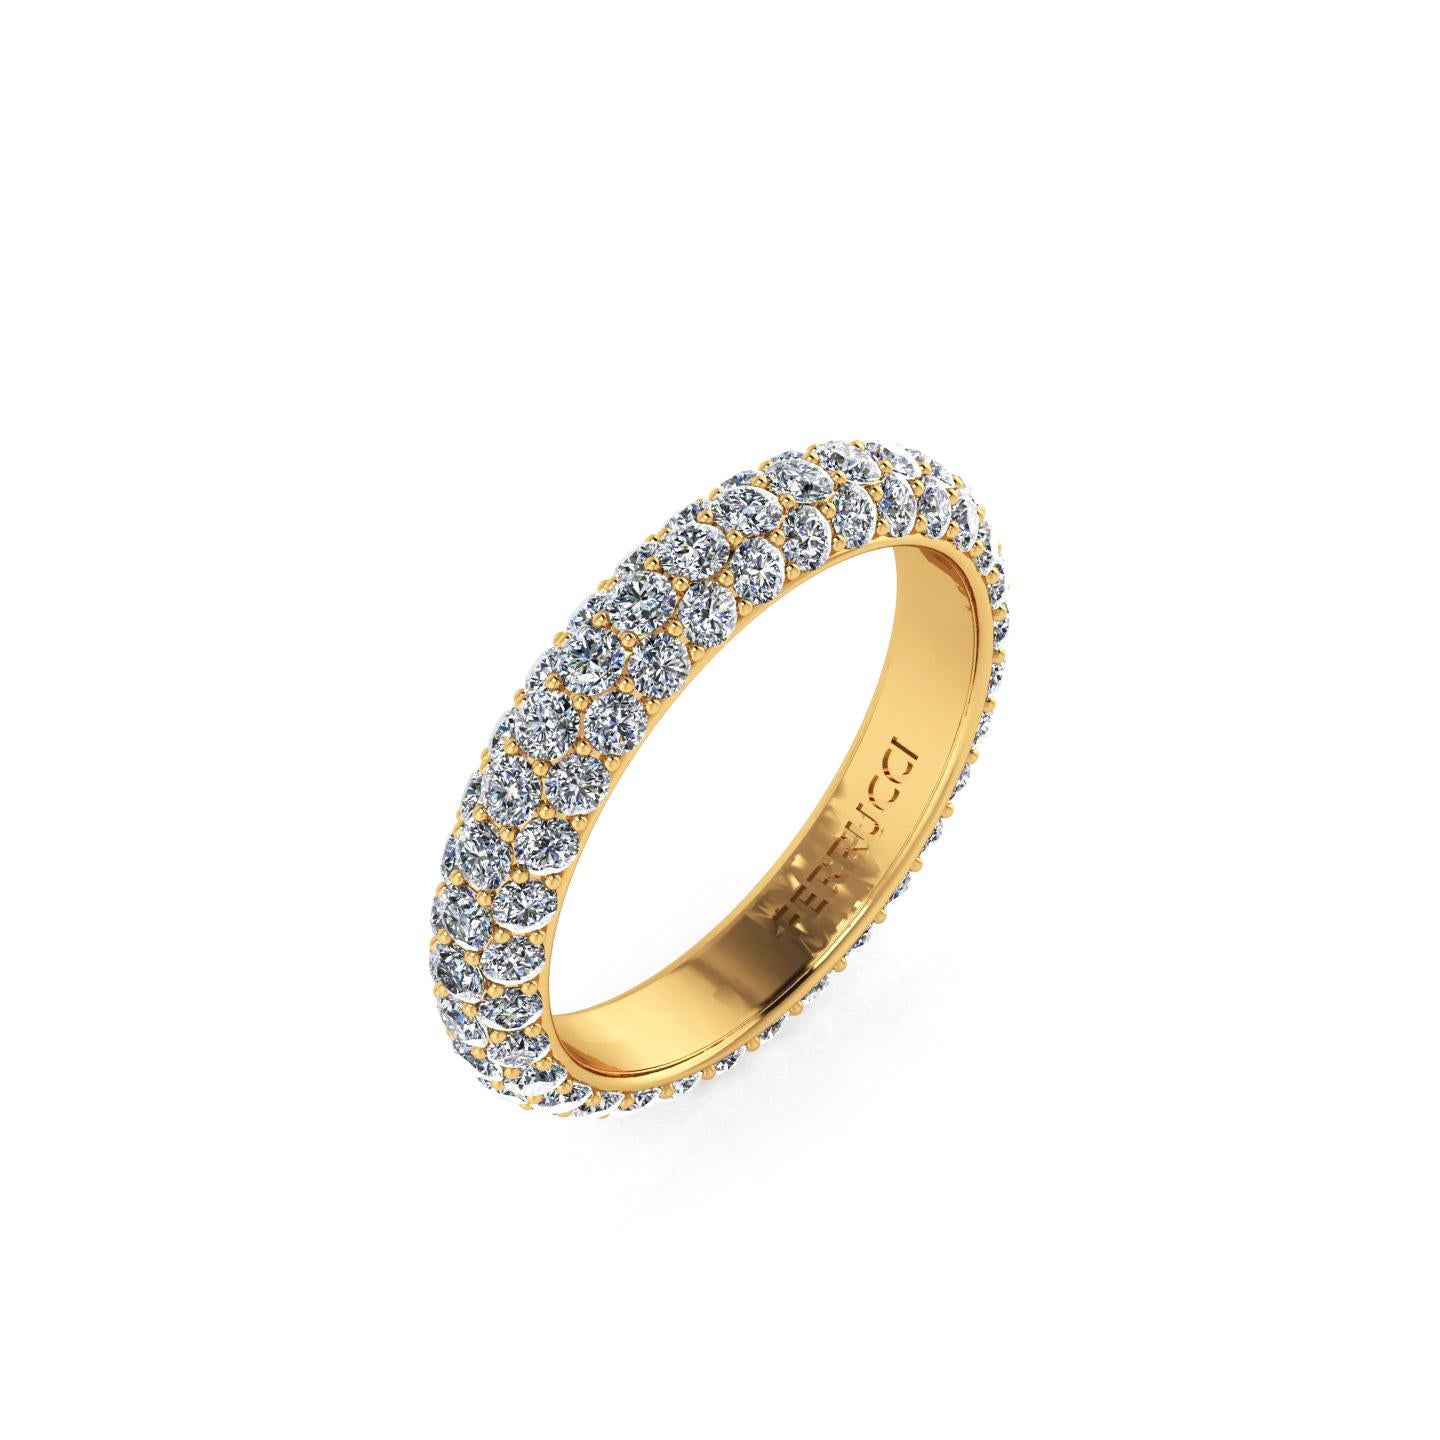 FERRUCCI diamond pave' band, a wrap of sparkling white diamonds, G color, VS/SI+ clarity, for an approximate total carat weight of 2.00 + carat, hand made in New York City with the best Italian craftsmanship, conceived in 18k yellow gold.
Classic,